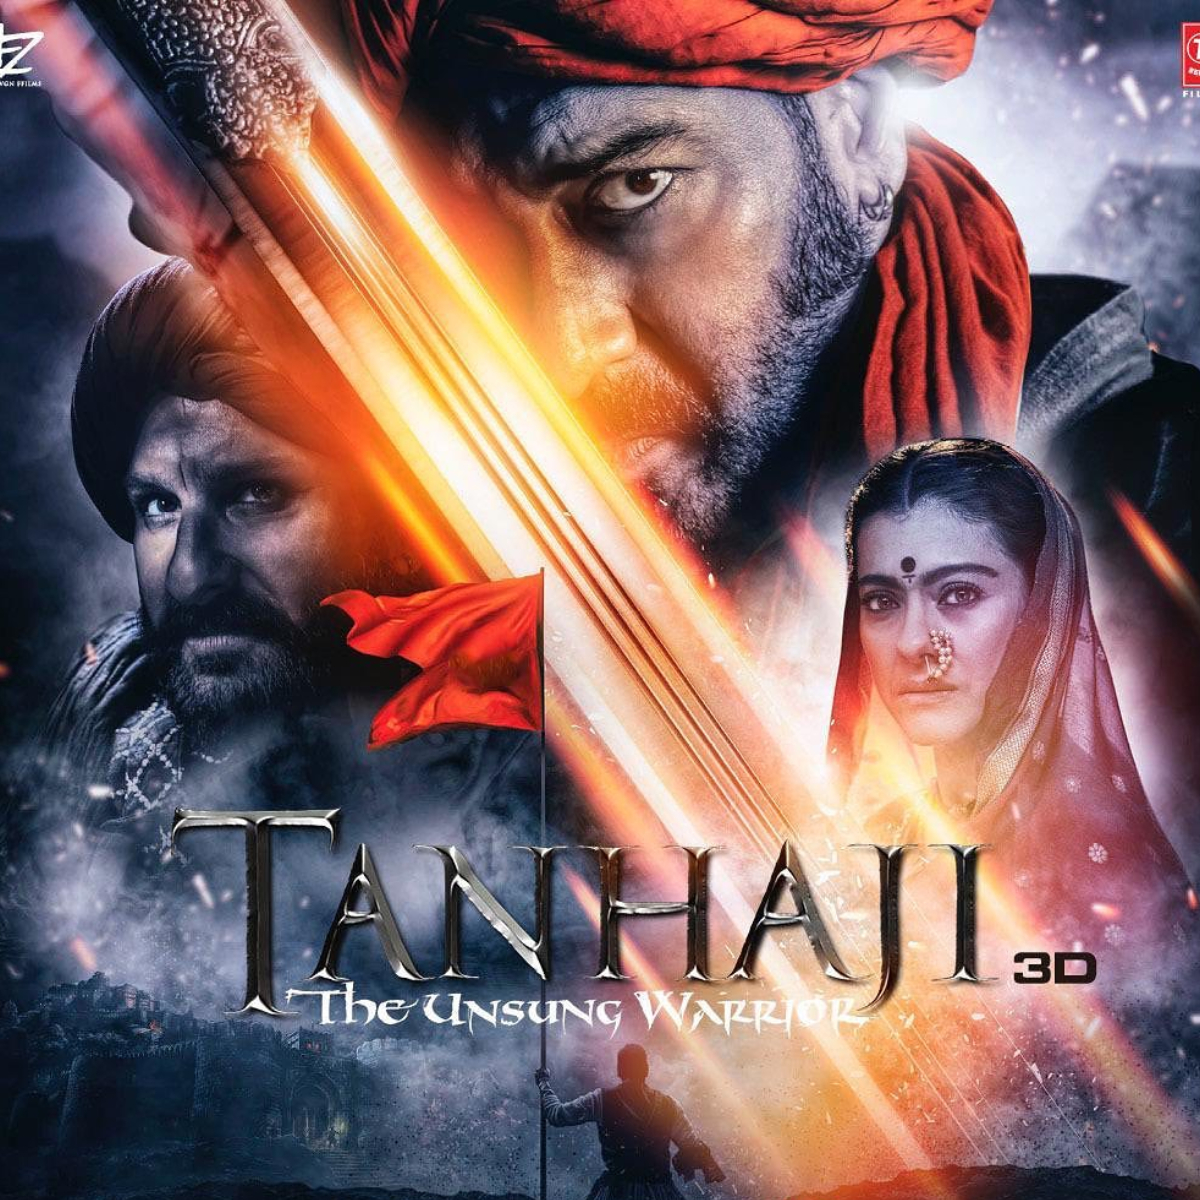 Tanhaji Box Office Collection Day 8: Ajay and Kajol starrer continues its successful run; Earns Rs 9.50 crore